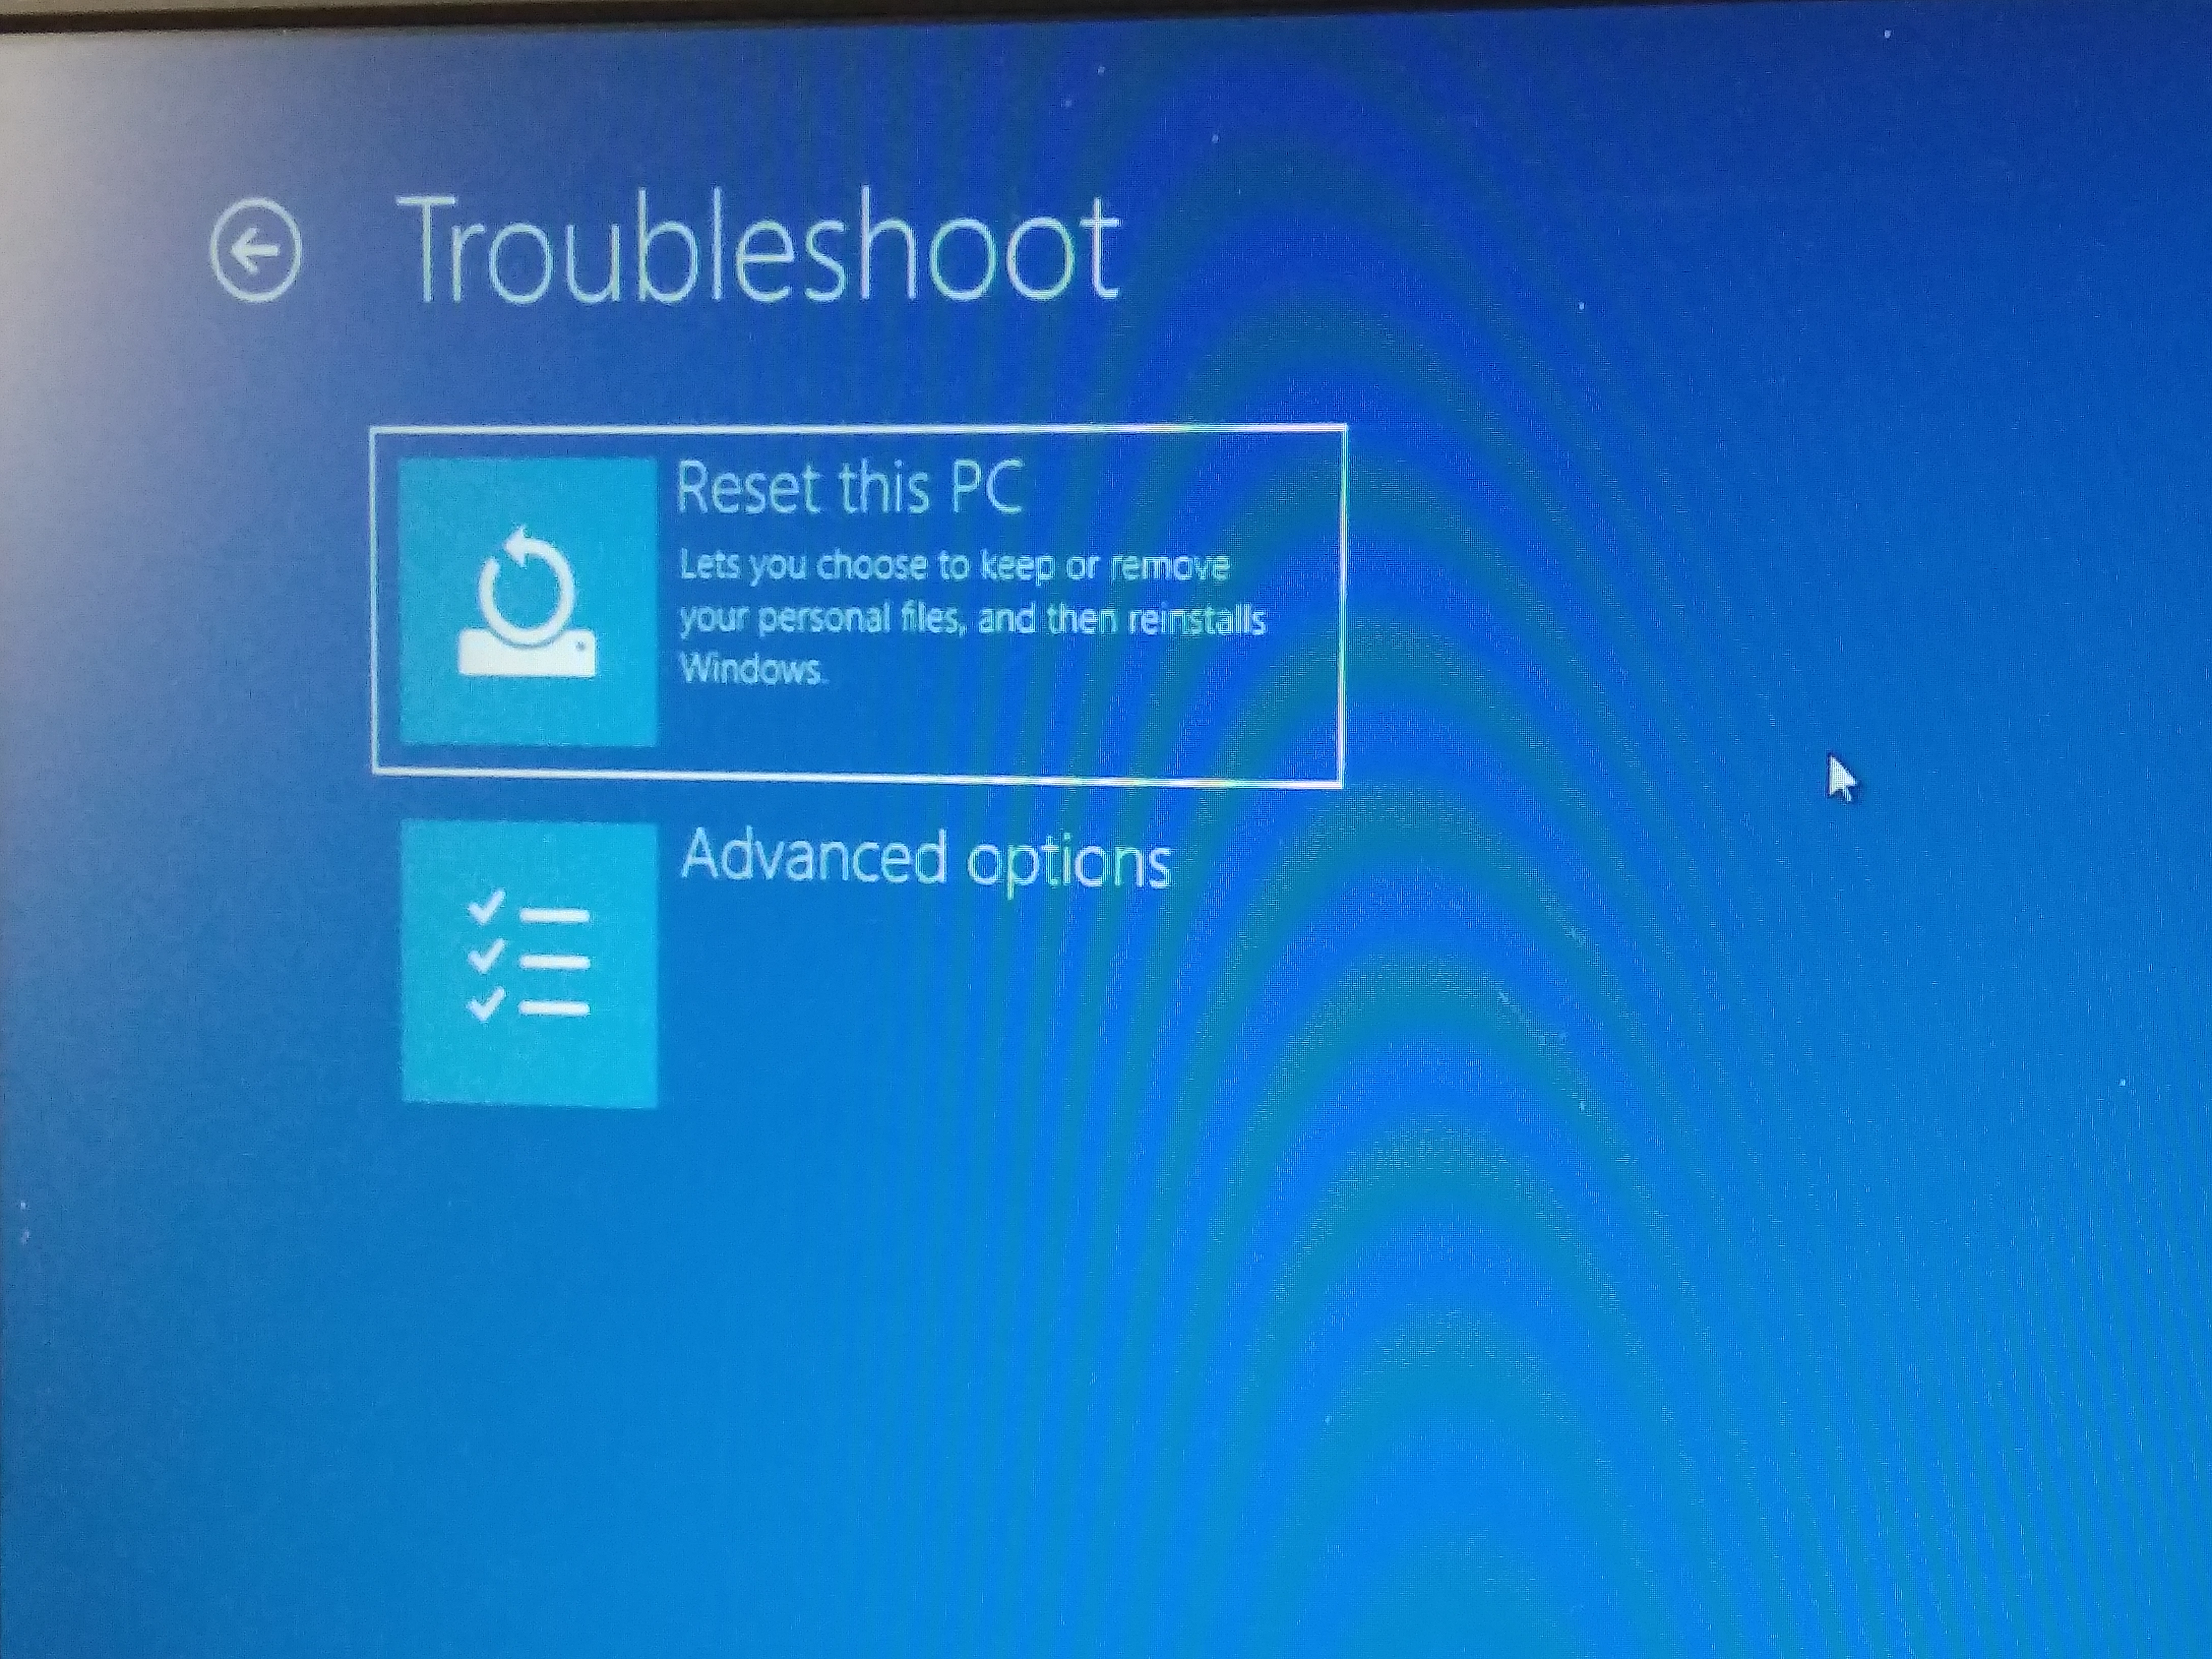 In Troublesshoot select - Reset this PC